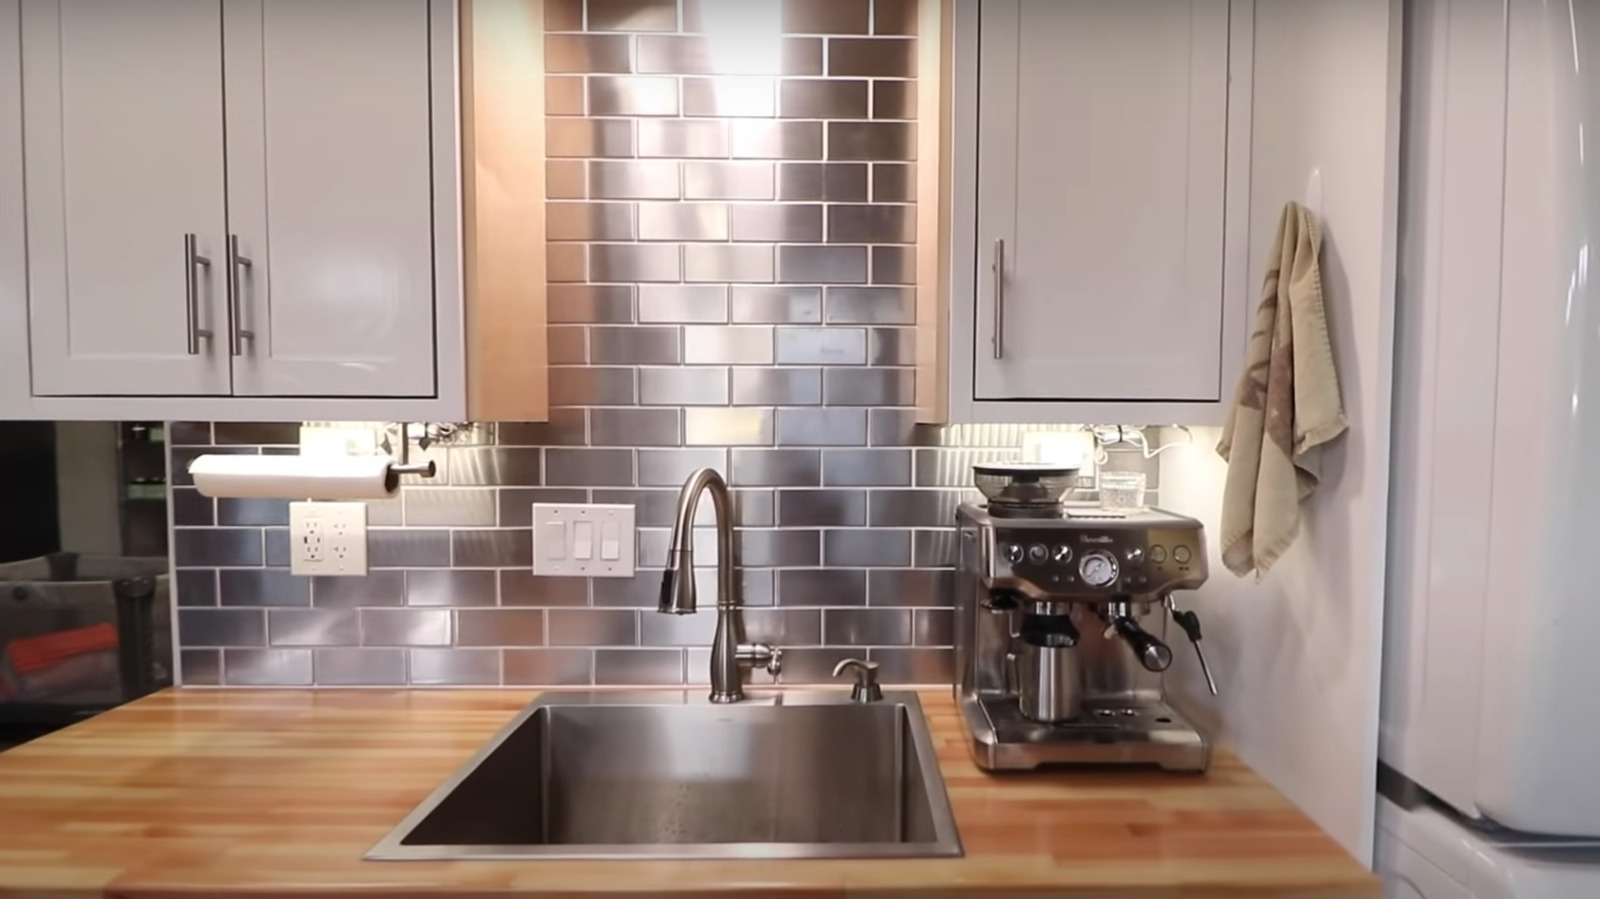 Here's Why A Stainless Steel Backsplash Just Might Be The Most Durable ...